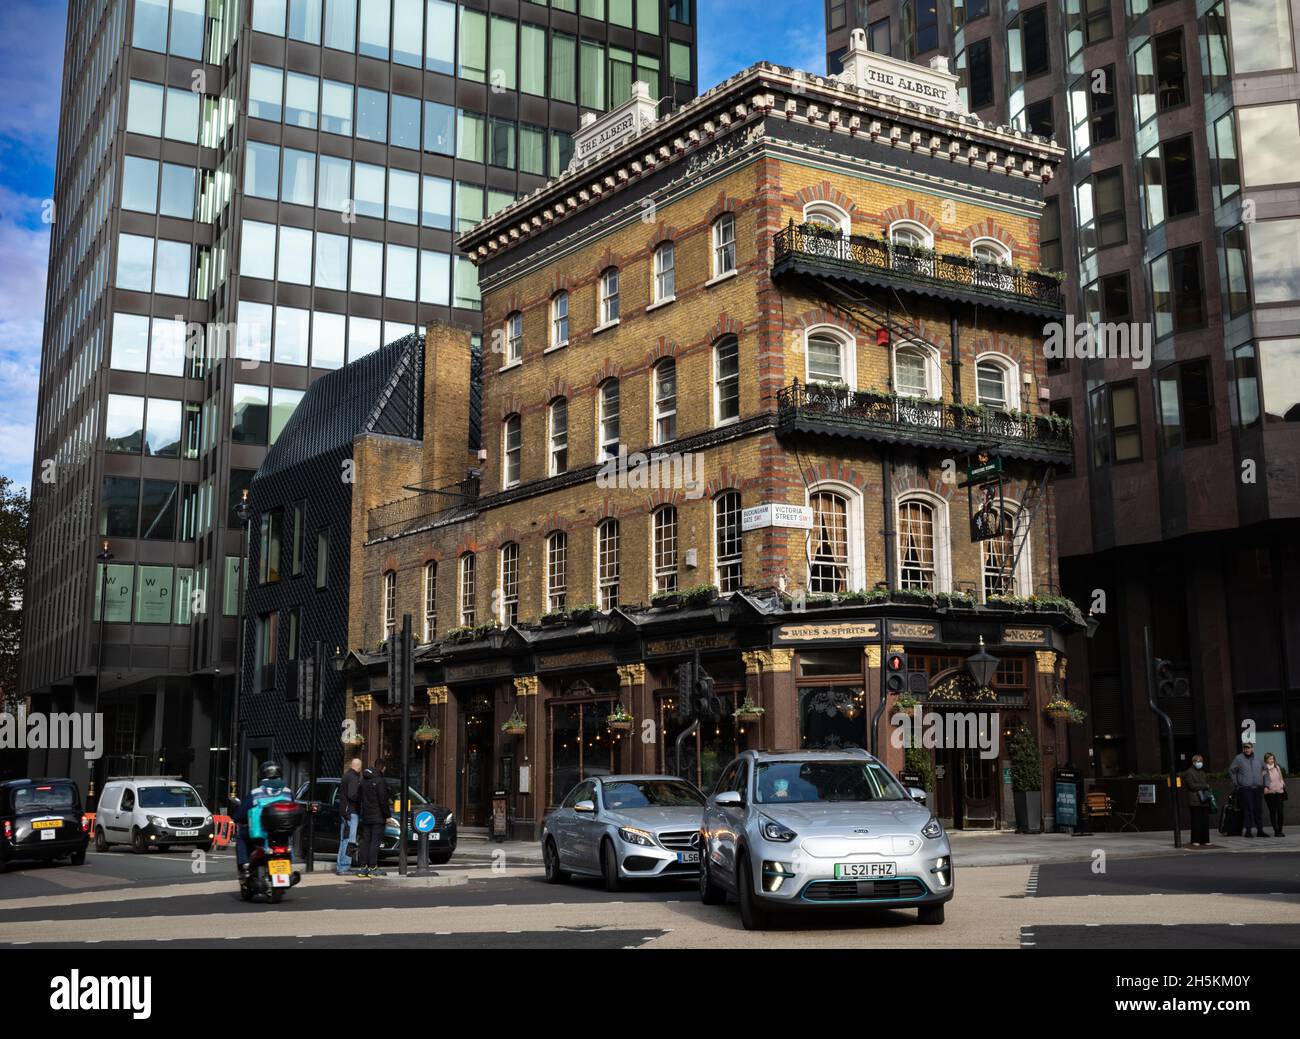 An electric car passes in front of the the landmark Albert pub in Victoria St, London, an old pub surrounded by modern buildings. Electric vehicles ar Stock Photo